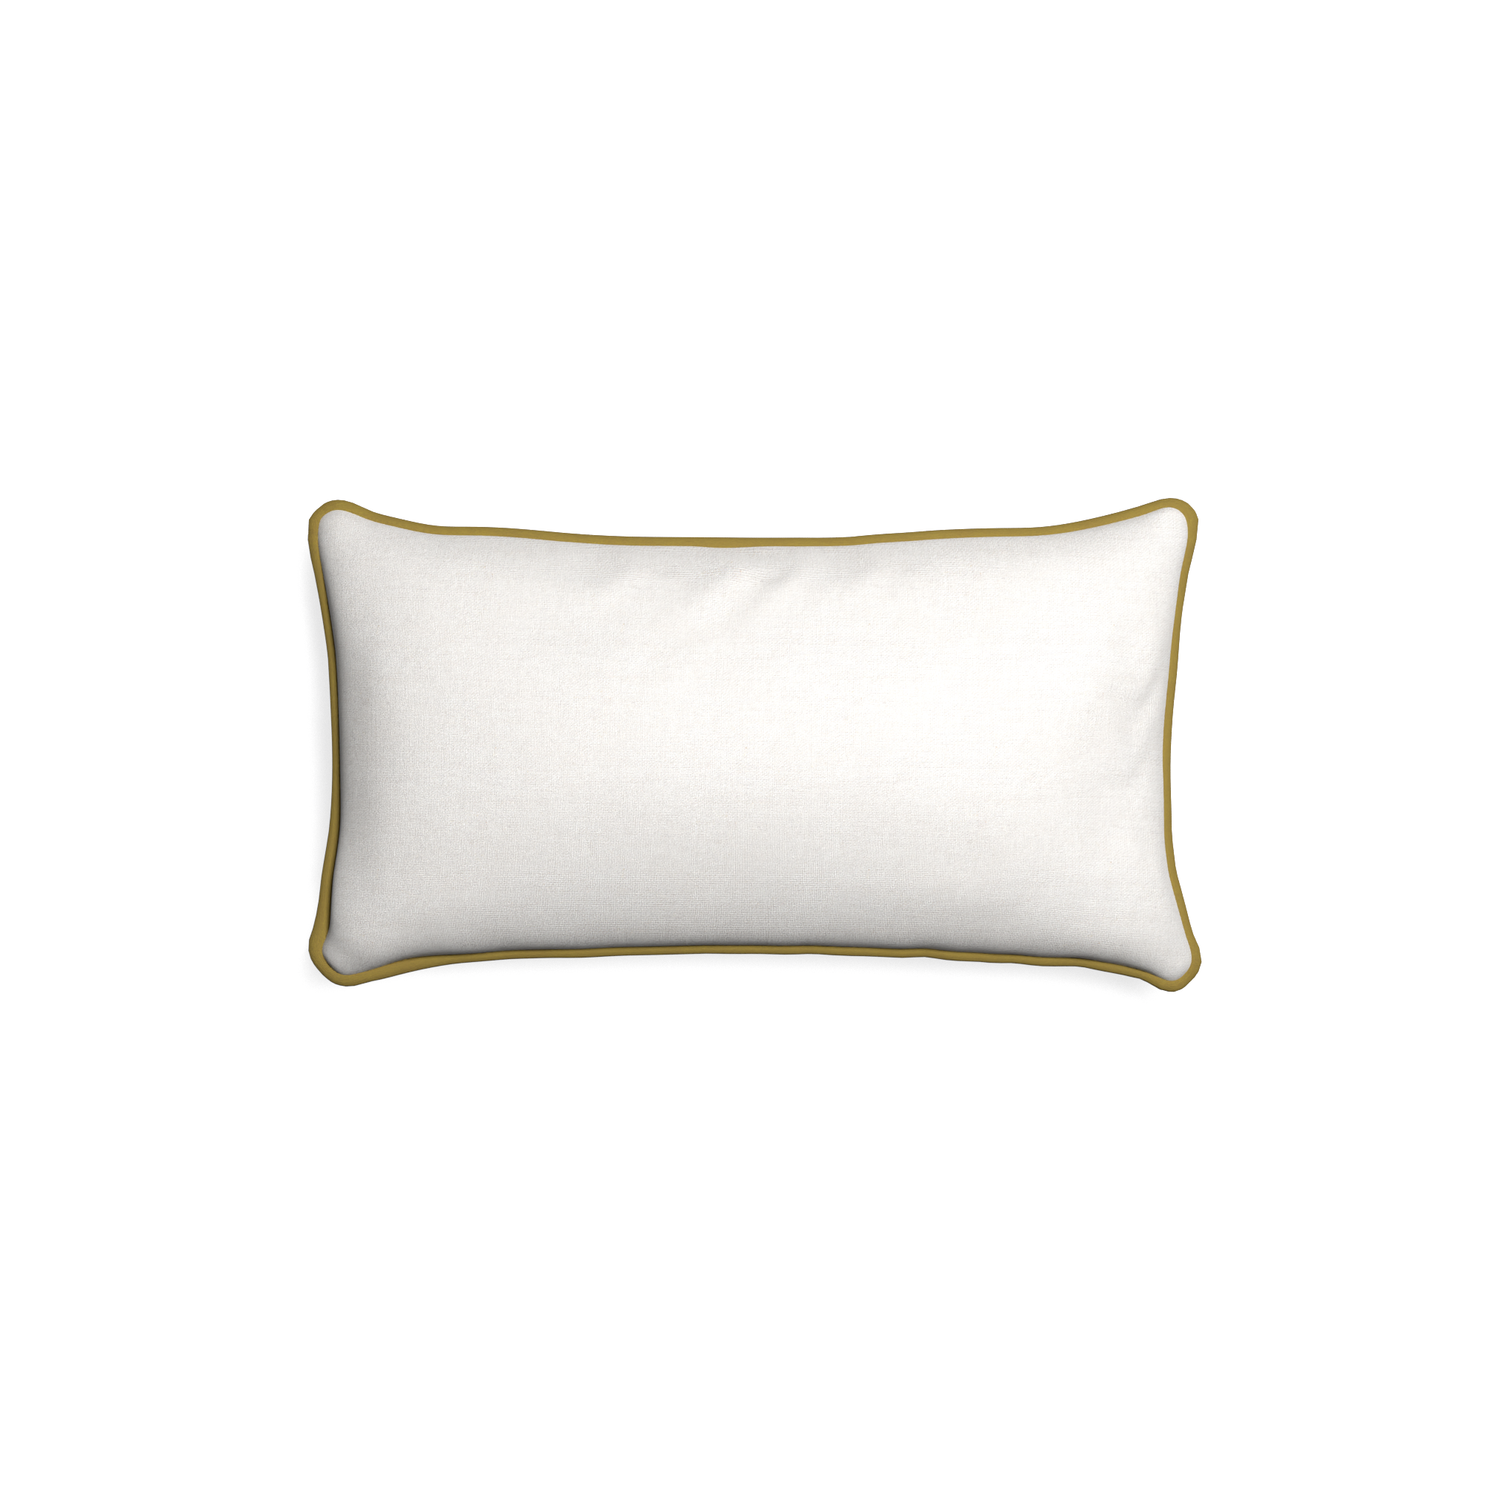 Petite-lumbar flour custom natural whitepillow with c piping on white background